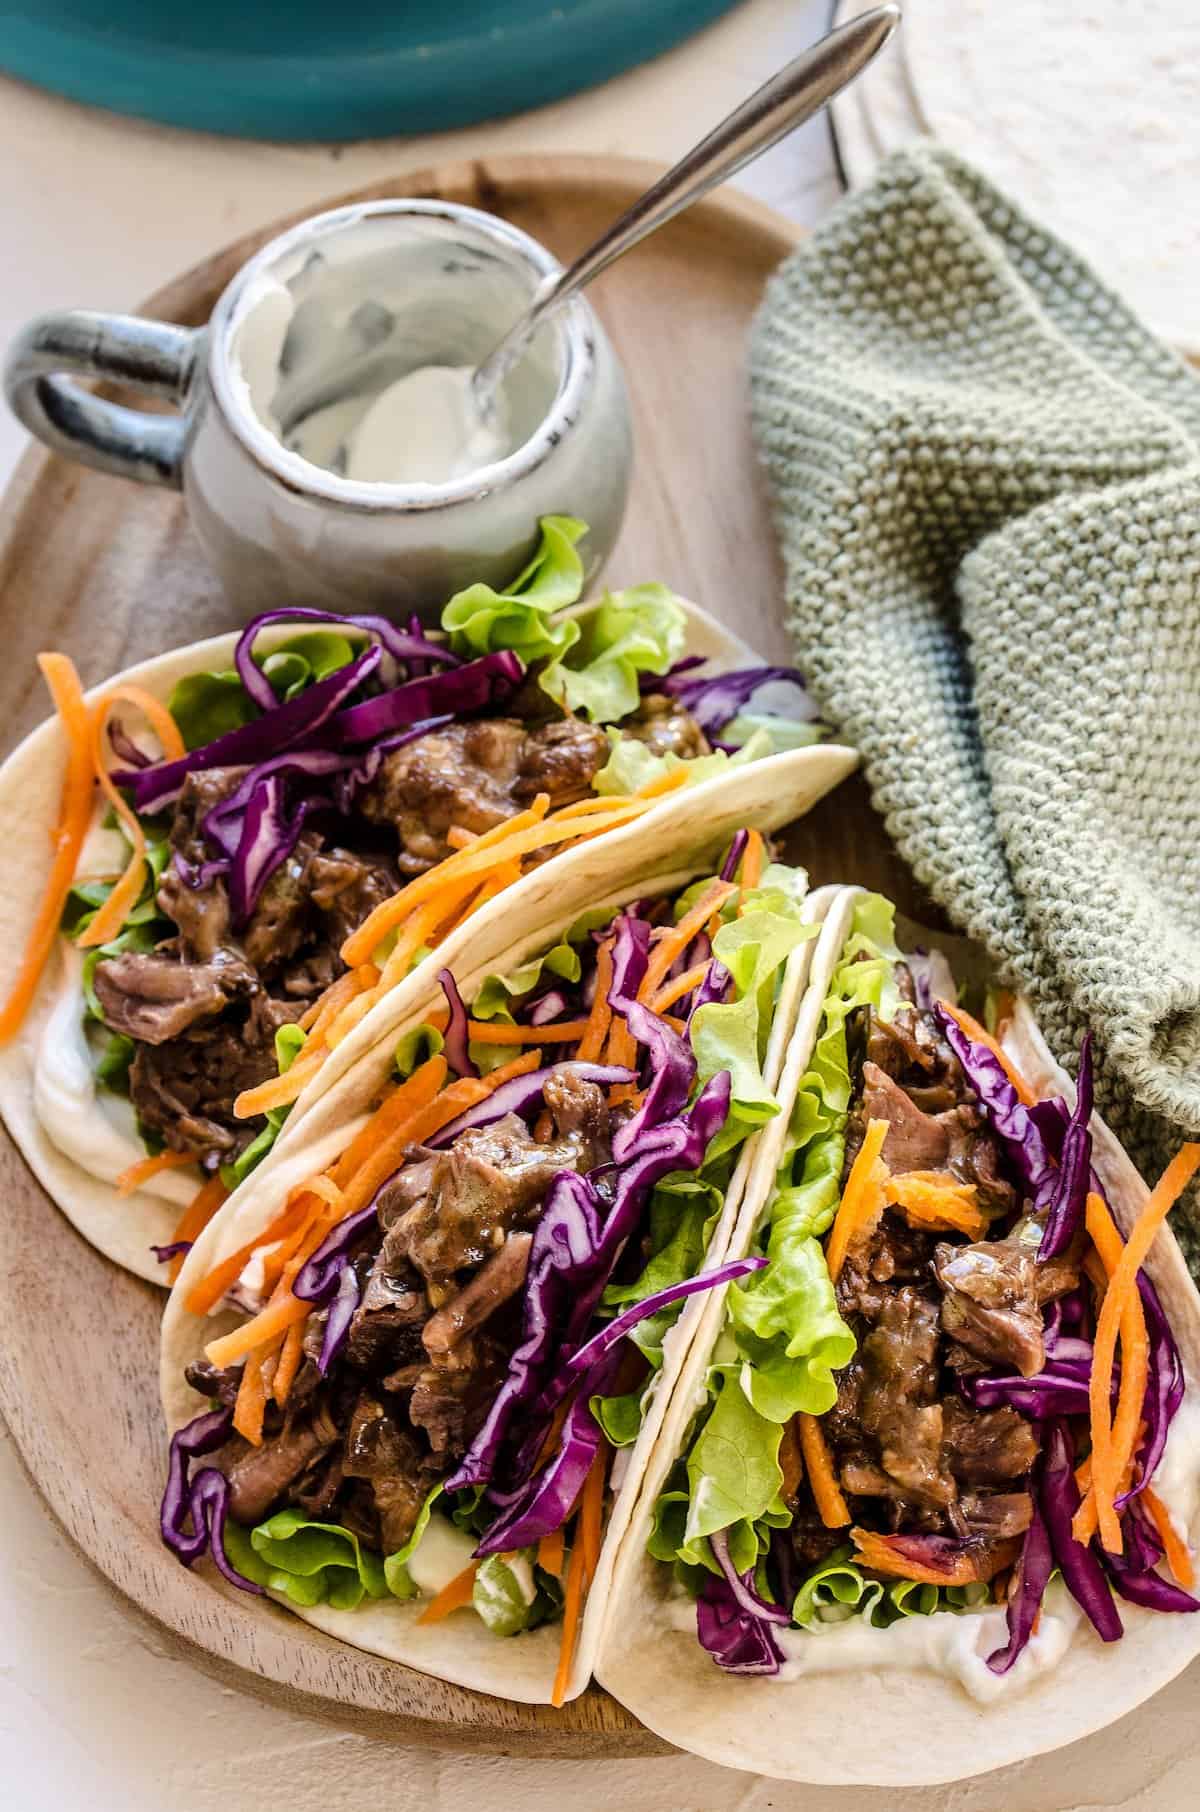 Three Korean beef tacos filled with shredded BBQ beef and veggies.